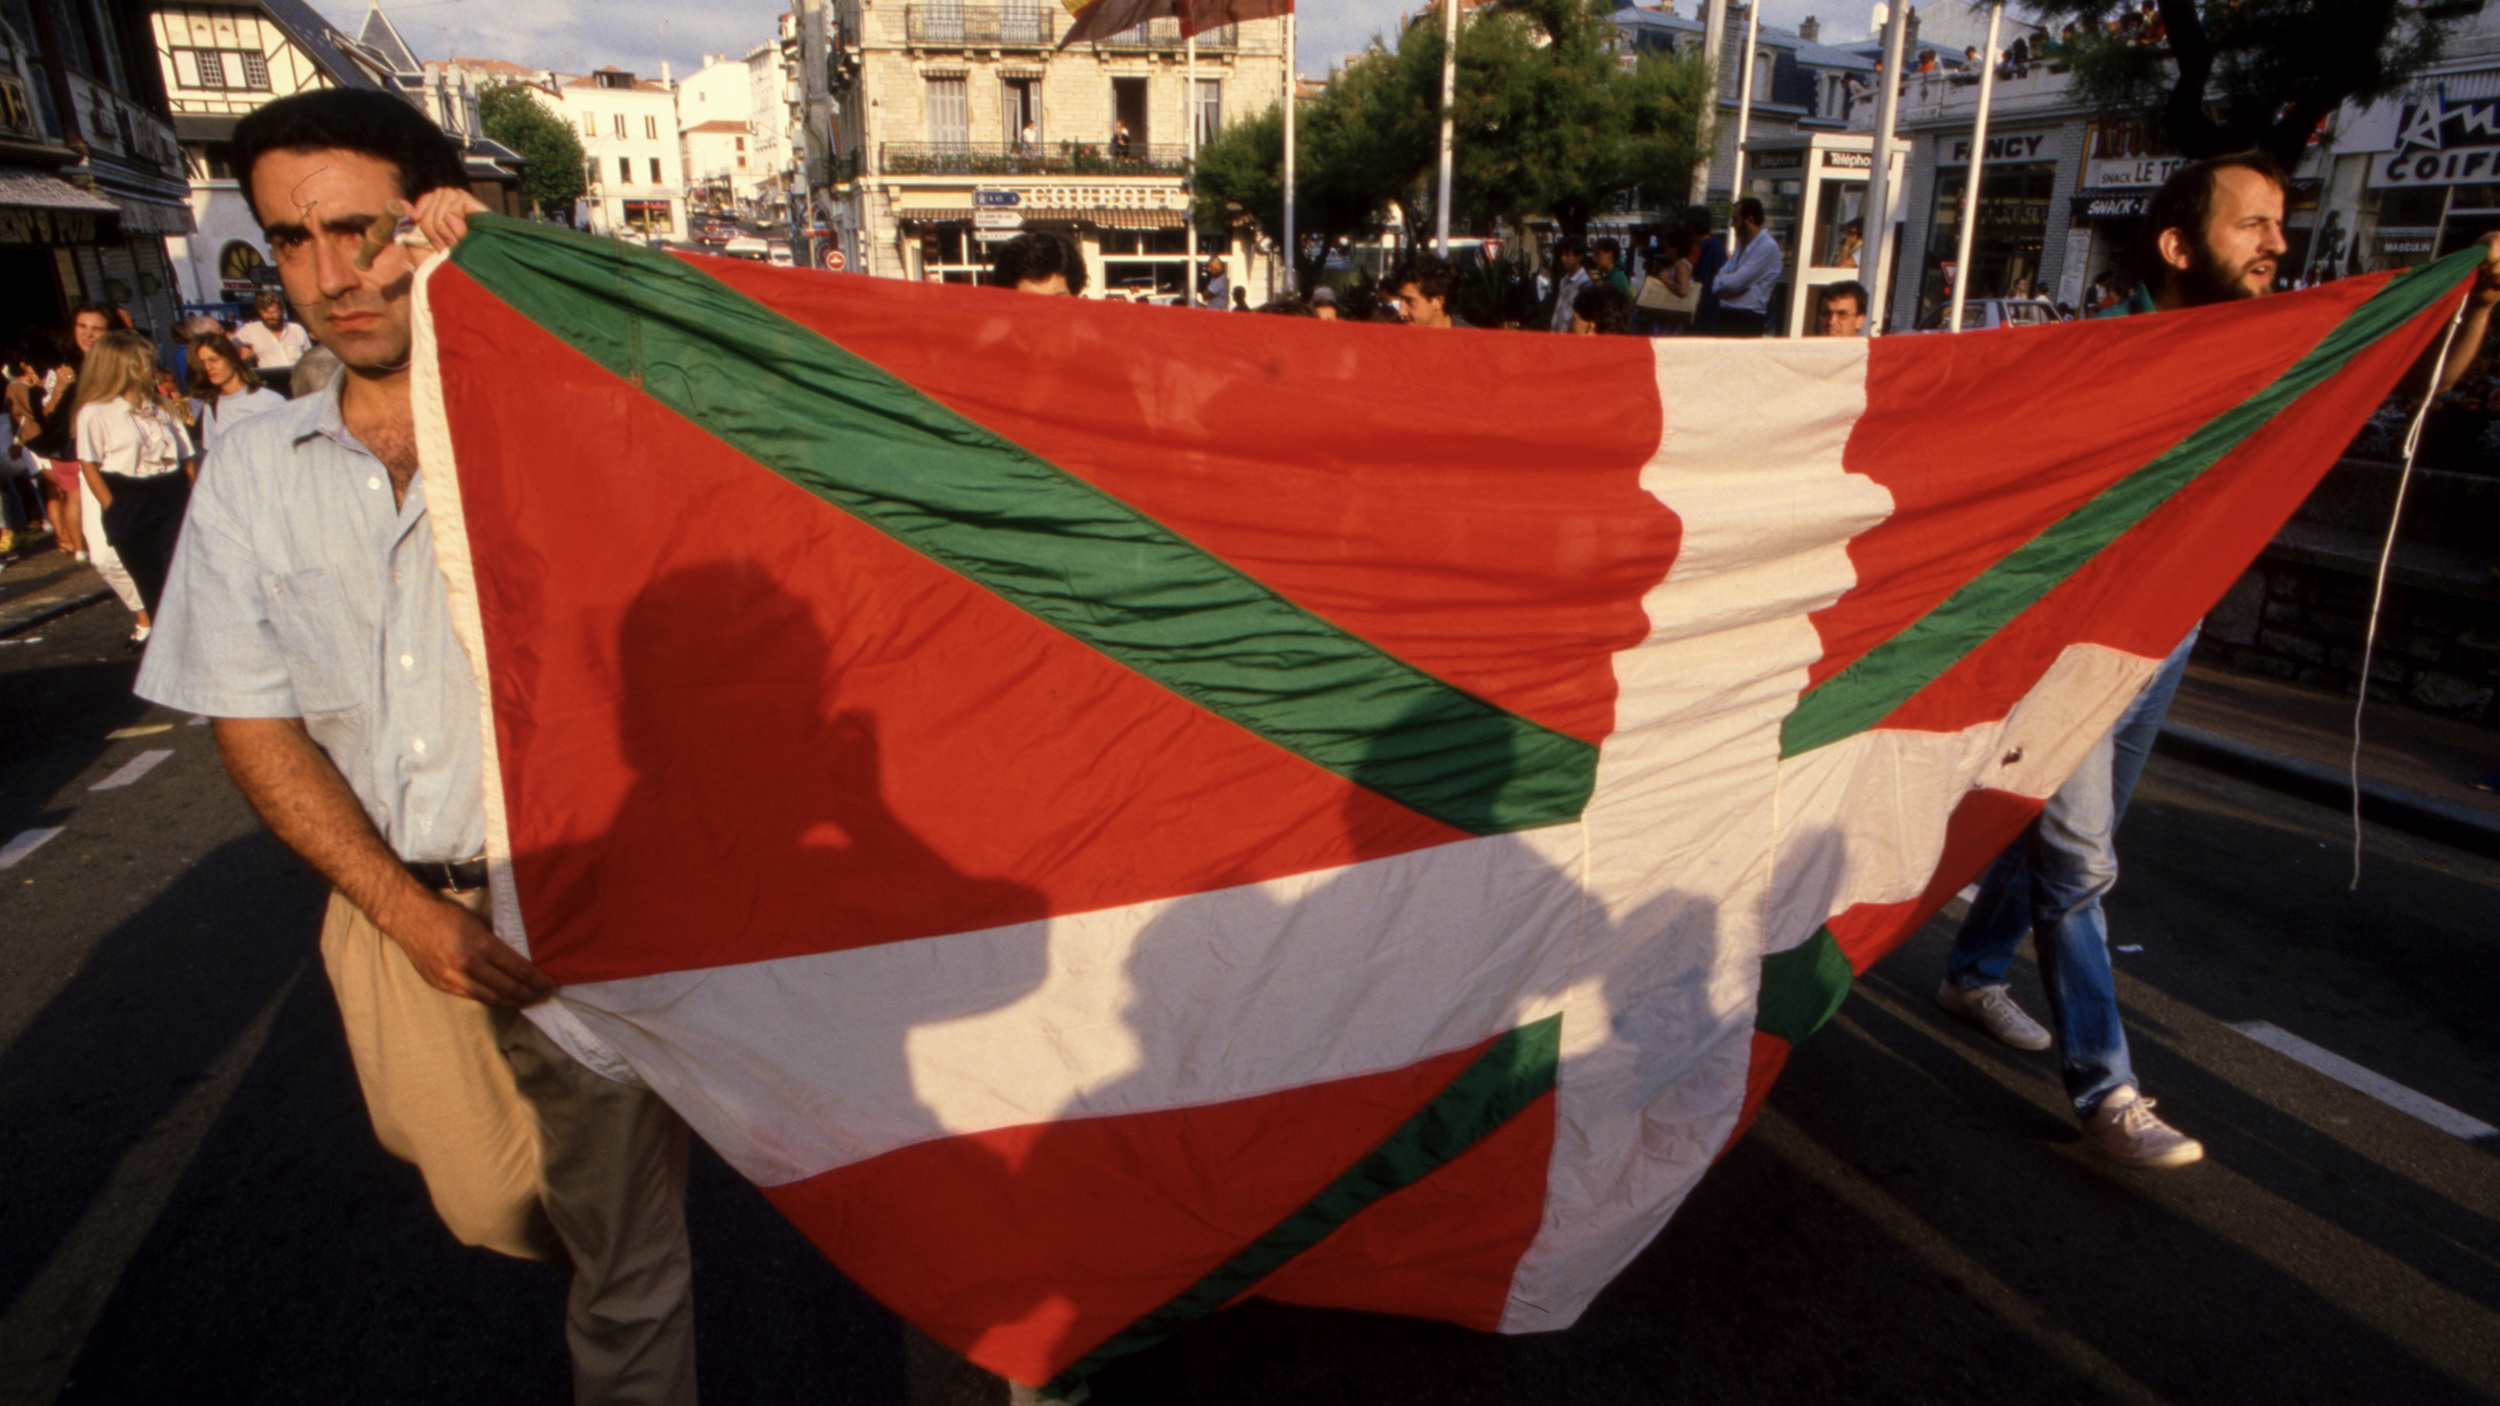 a man holding a large red, green and white flag.